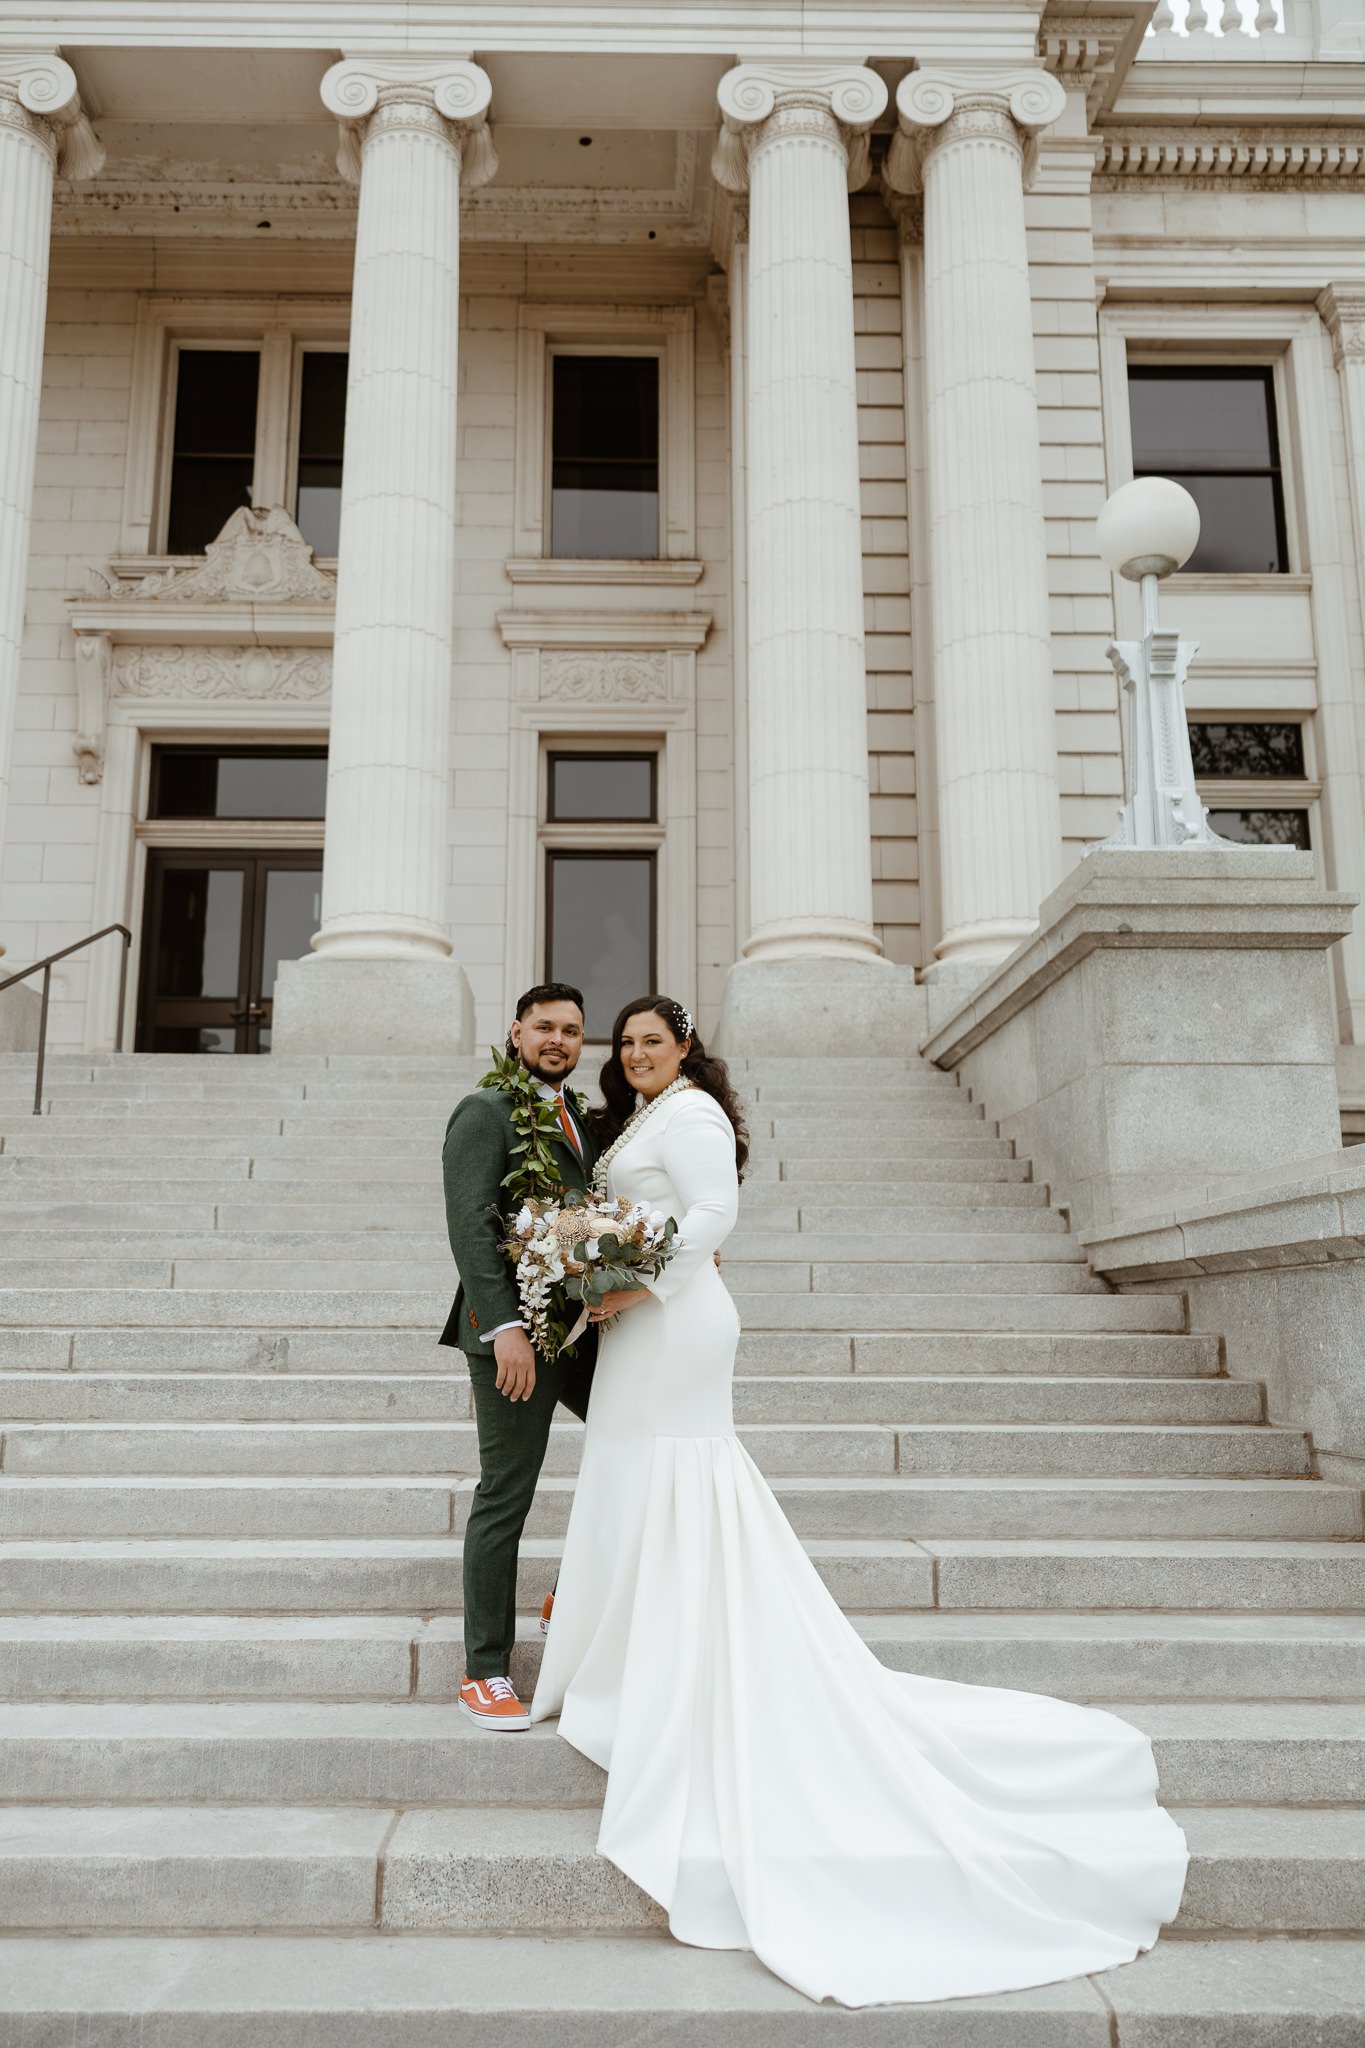  An elegant and simple Provo Courthouse wedding is a great way to have a beautiful wedding without the expense and hassle of a destination wedding. Set in the heart of downtown Provo, you can plan a wedding that celebrates your love and commitment to